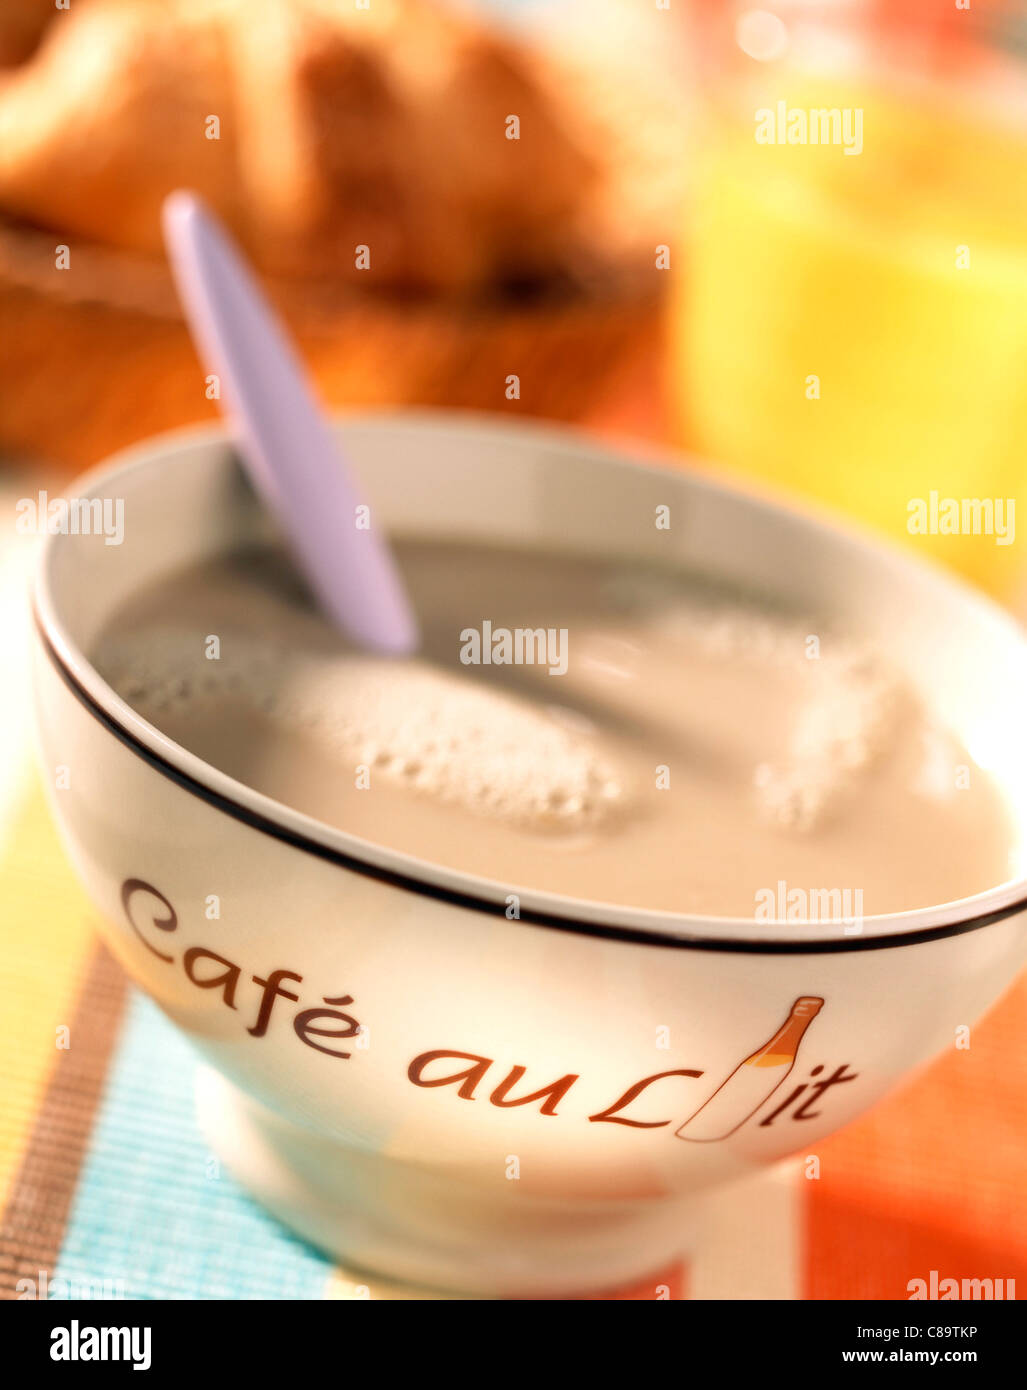 Coffee with milk in bowl Stock Photo